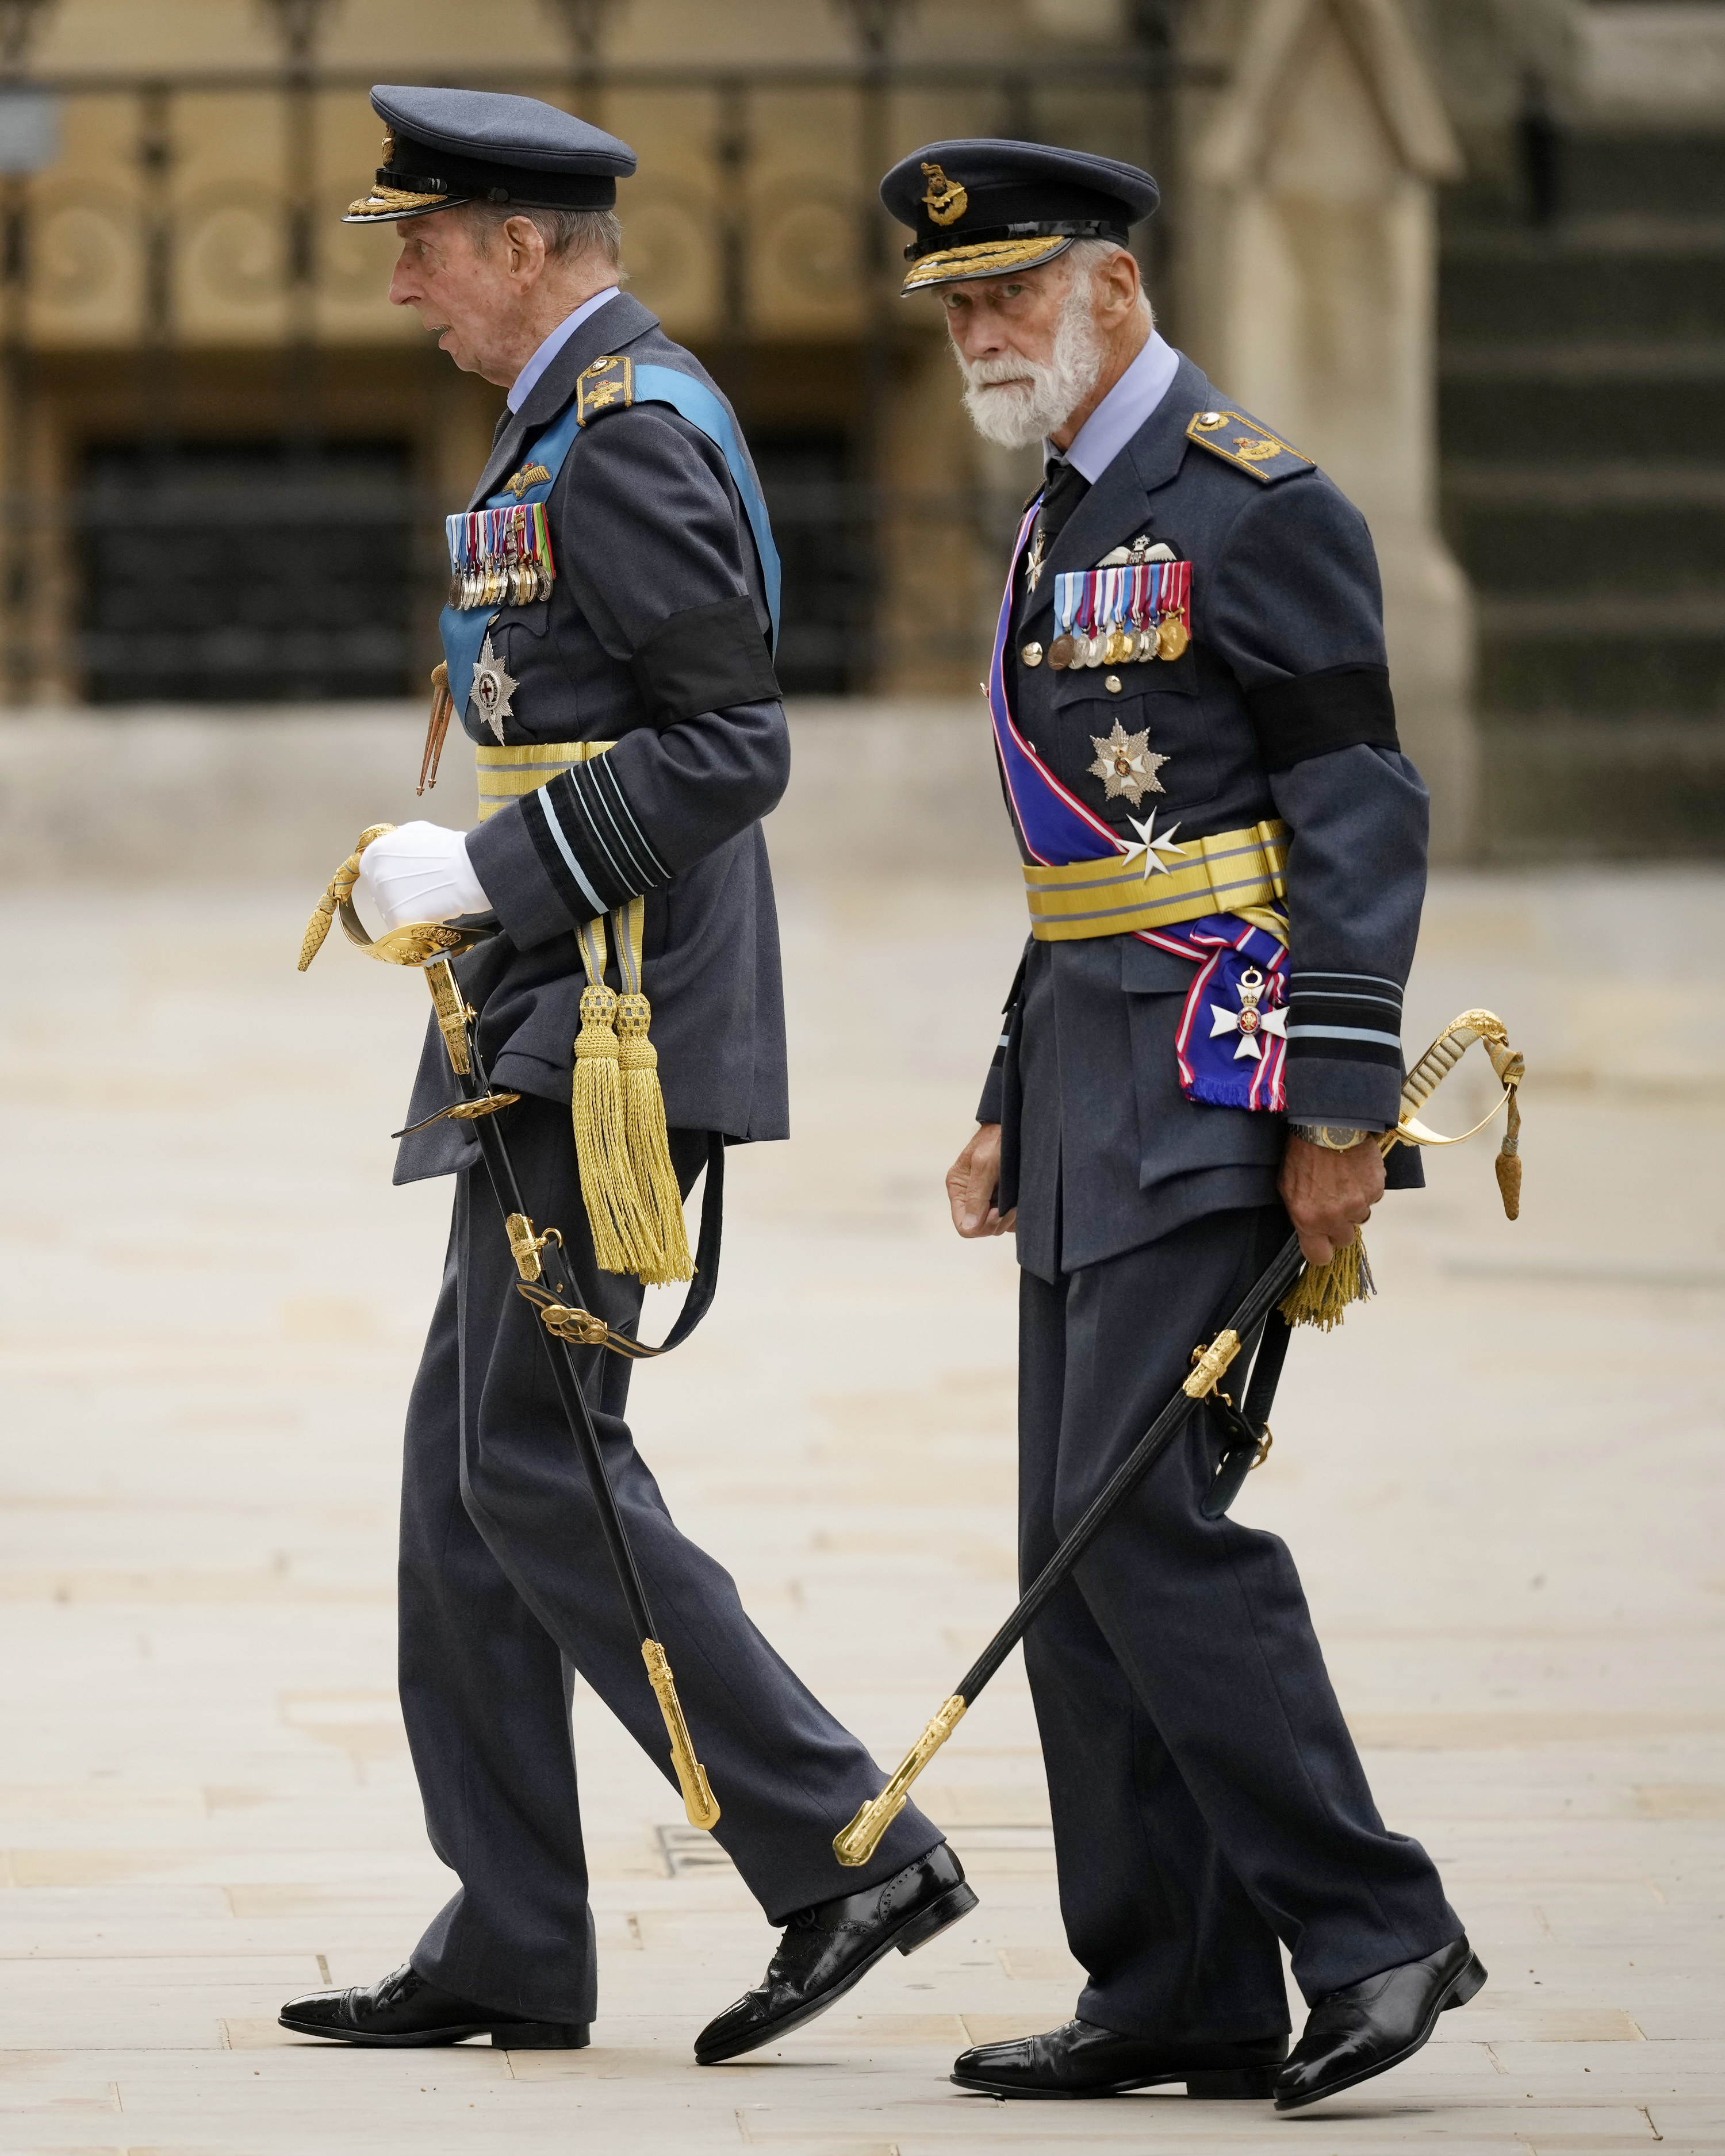 Edward and Michael arrive at Westminster Abbey in military dress ahead of the Queen&#x27;s funeral